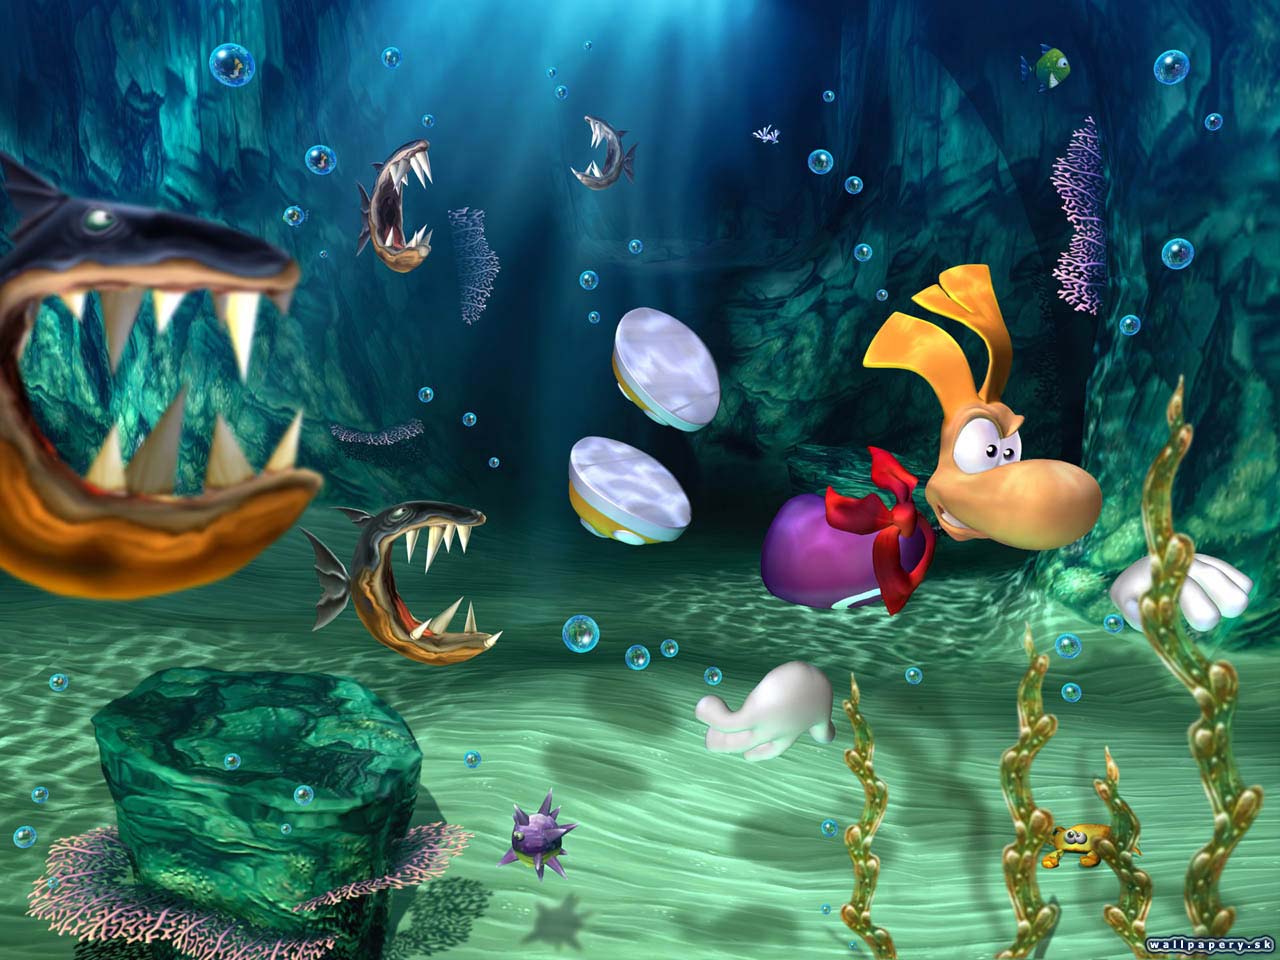 Rayman 2: The Great Escape - wallpaper 2